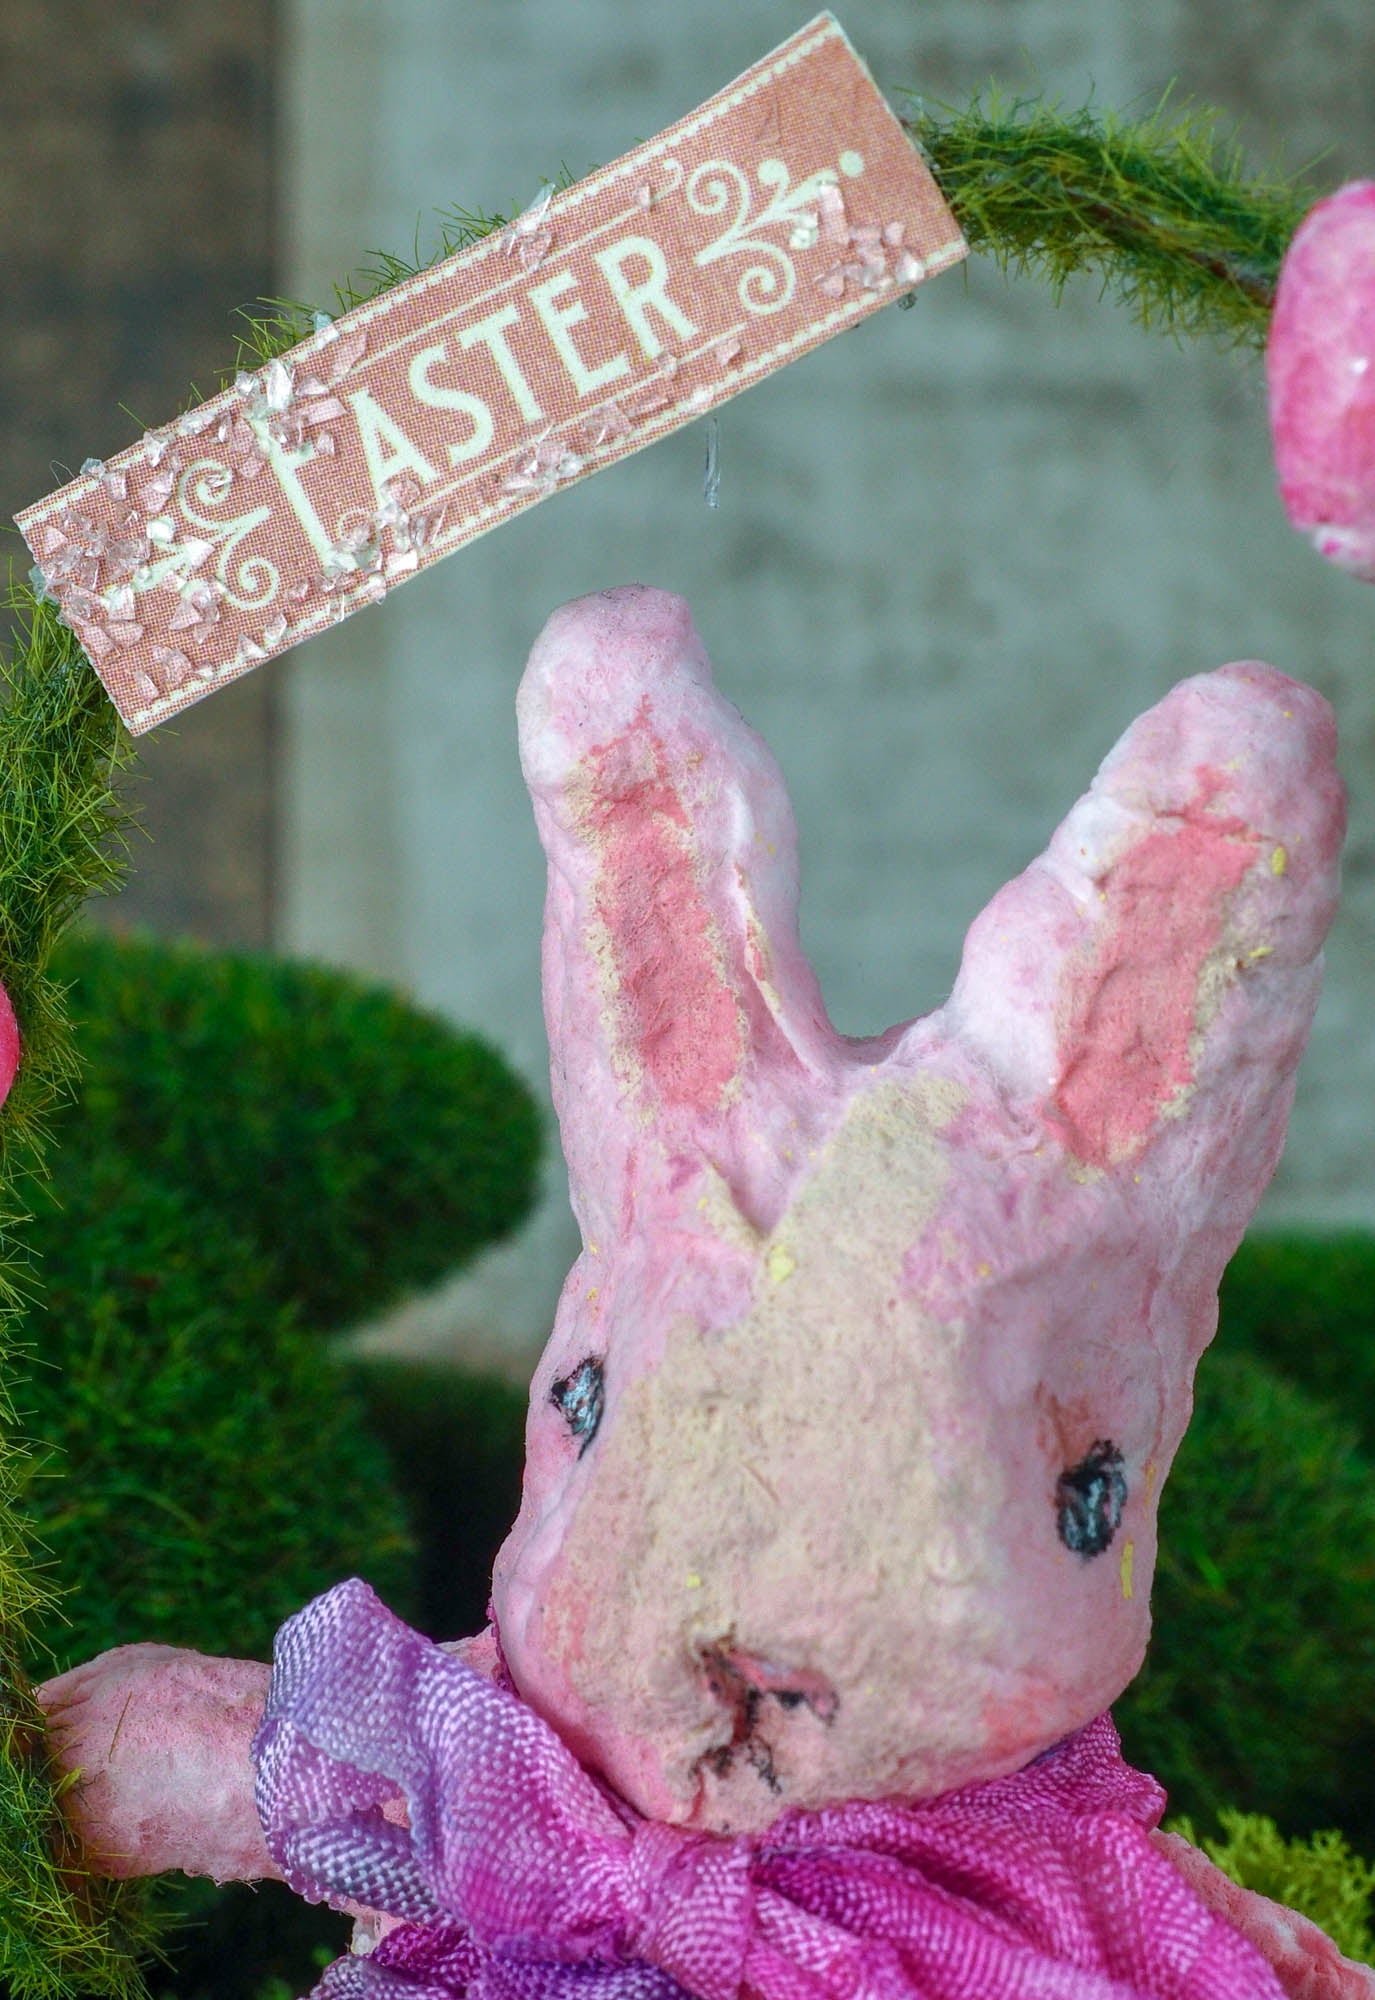 Spring always inspires Danita to make beautiful handmade decorations for when the flowers start to bloom, just like this 4" spun cotton handmade pink Easter bunny rabbit art doll by Danita, hand painted and dressed in a hand painted polka dot paper skirt.